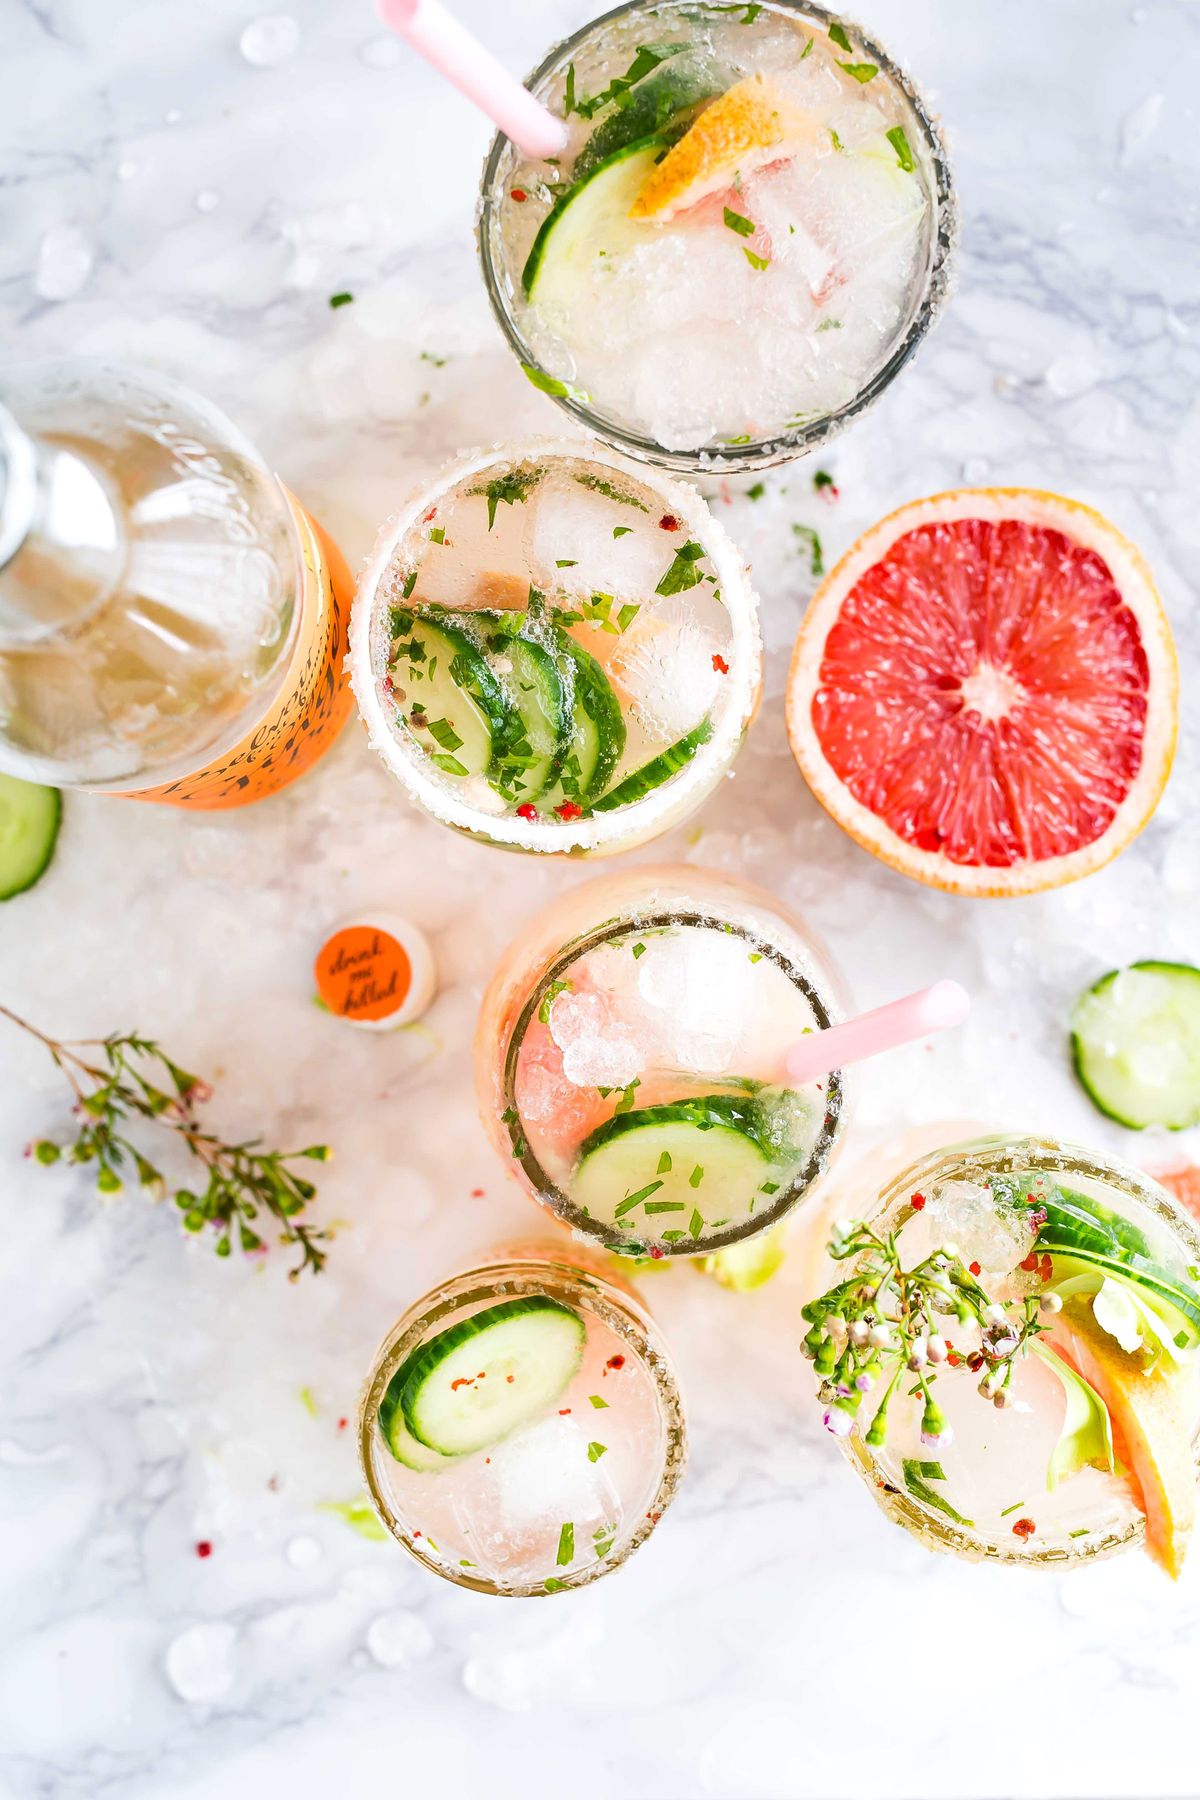 25 Refreshing Cocktails for Your Next Spring Soirée